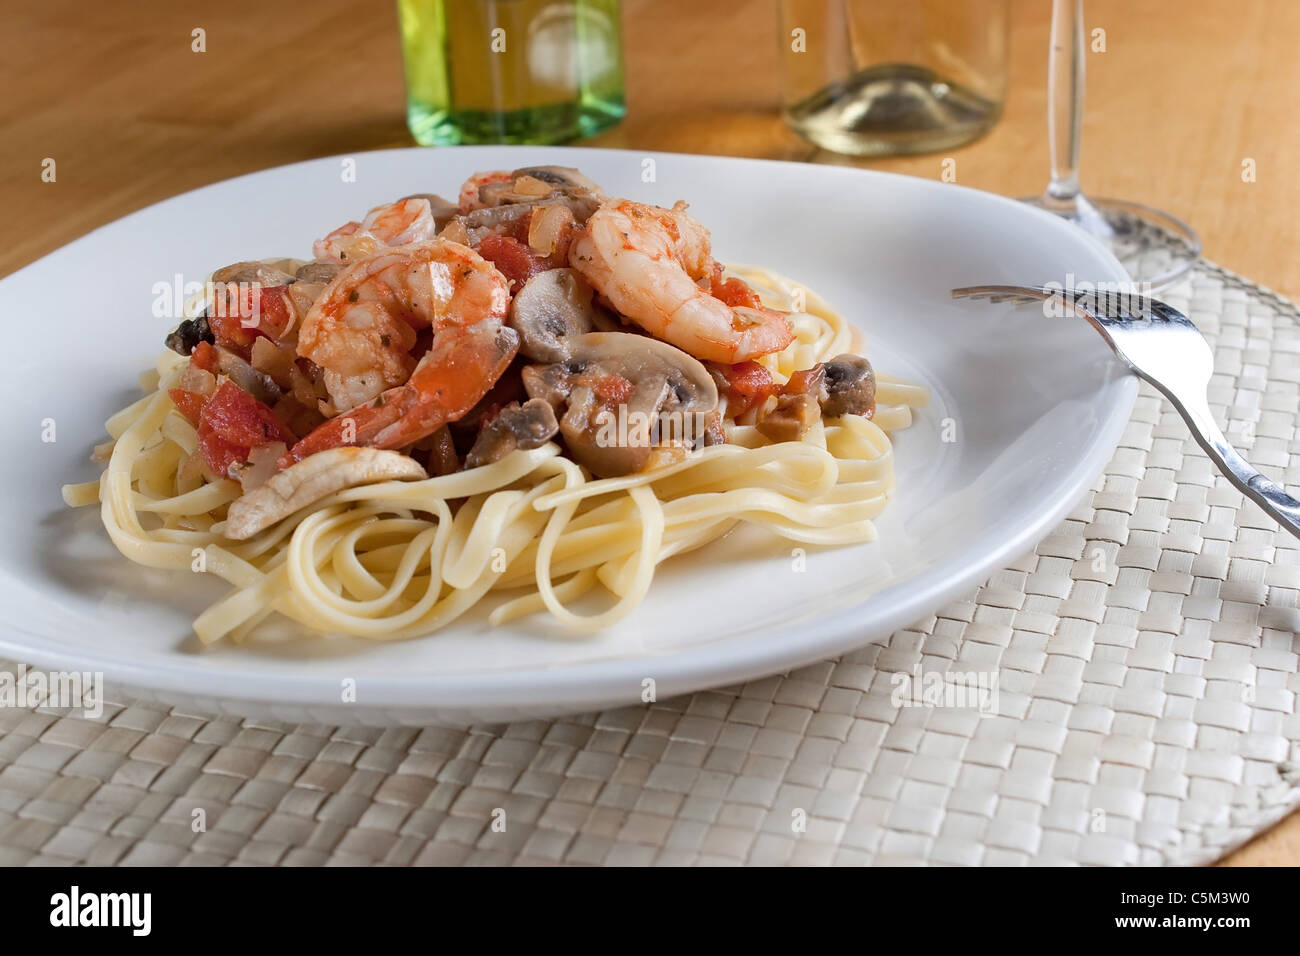 A delicious shrimp scampi pasta dish with mushrooms and diced tomatoes on a white plate. Stock Photo